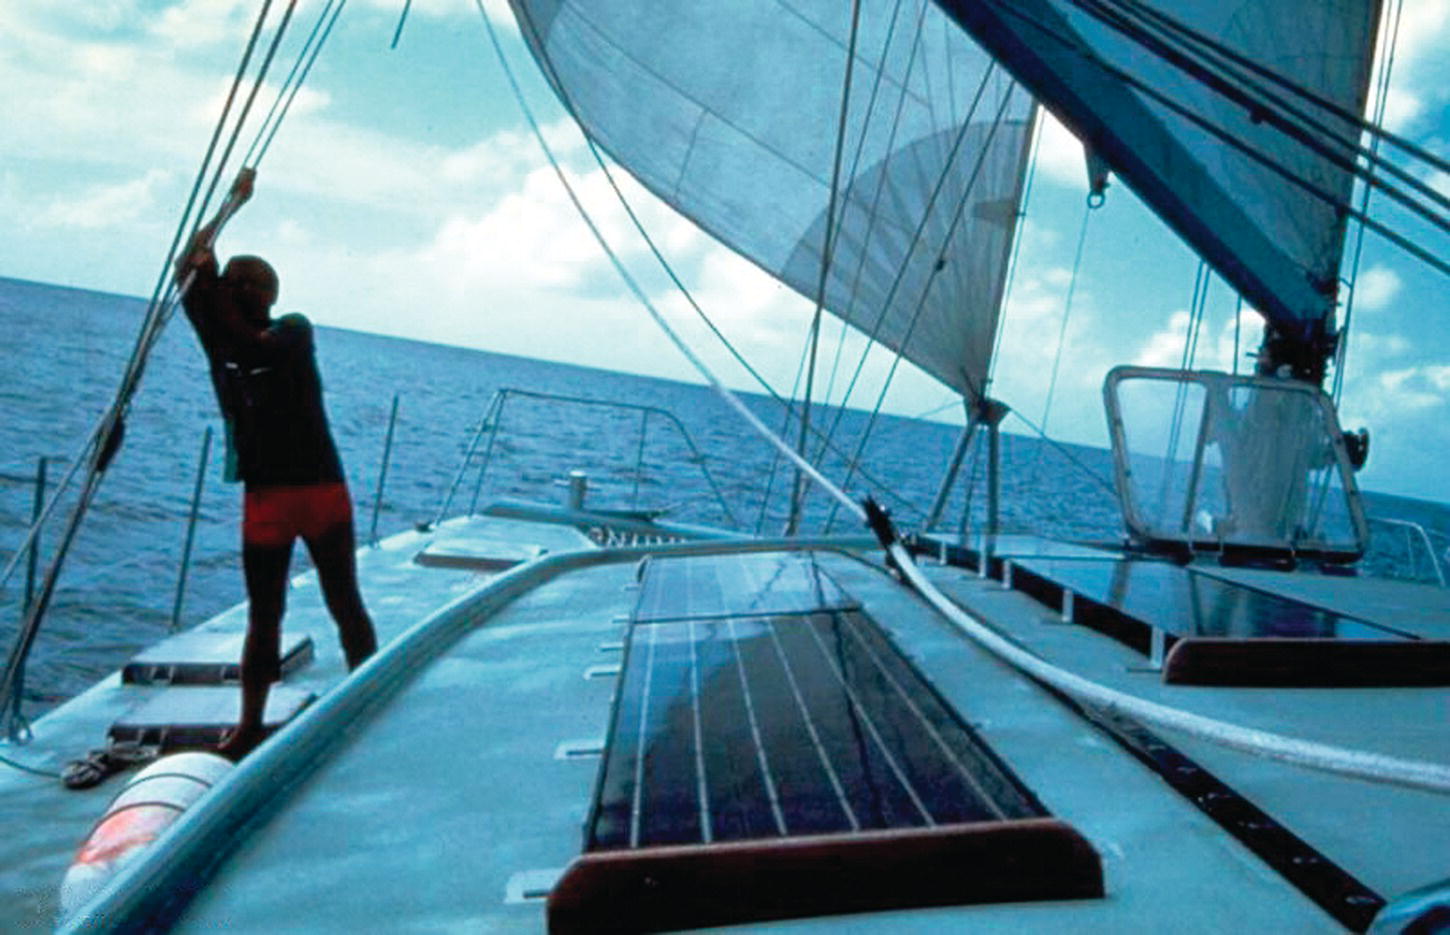 A yacht with PV modules installed on the decks, with a man standing on the left side.